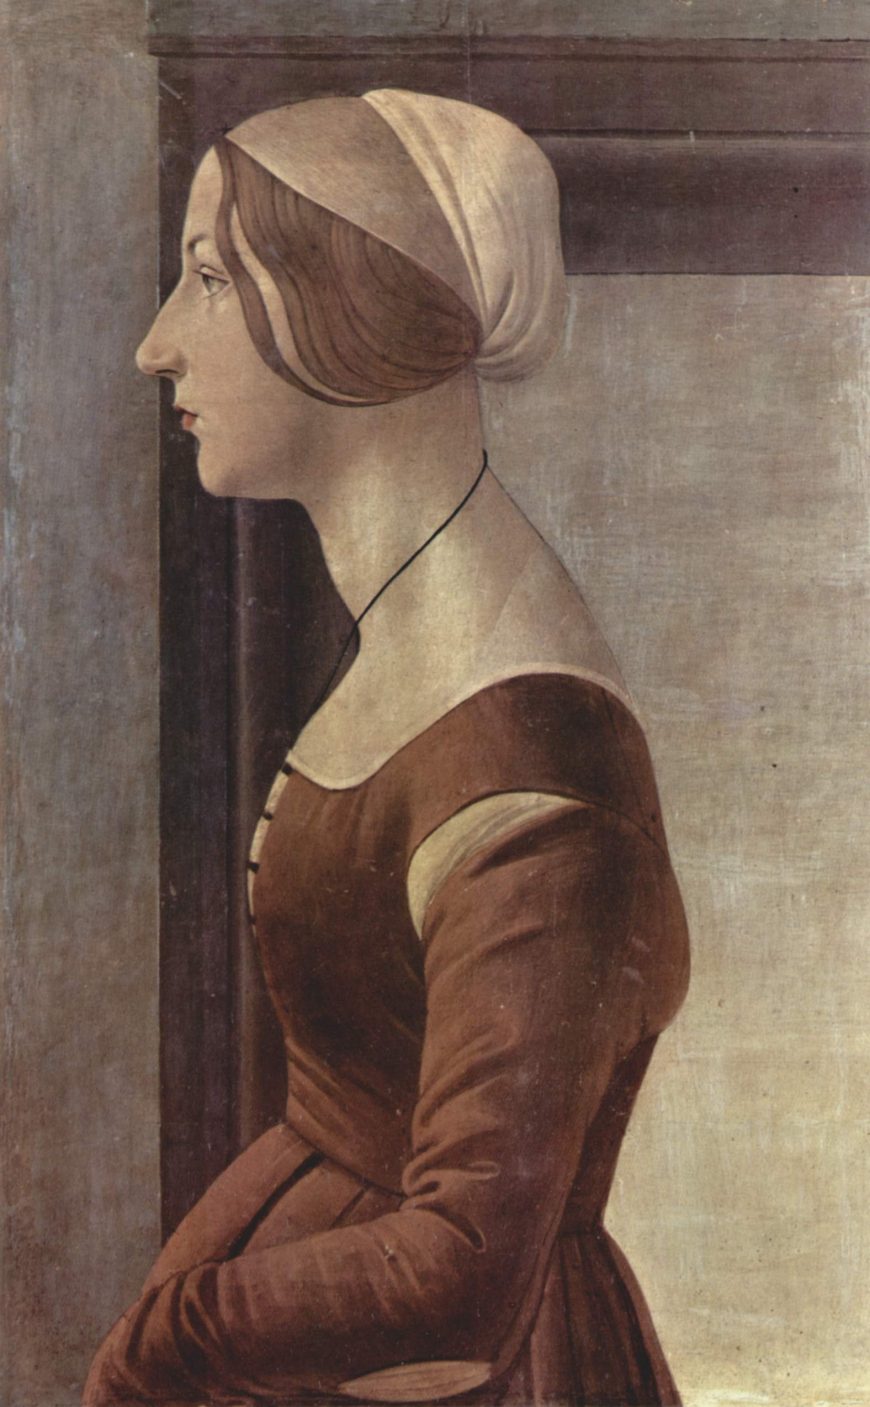 Sandro Botticelli, Portrait of a Young Woman, c. 1485 (Galleria Palatina)